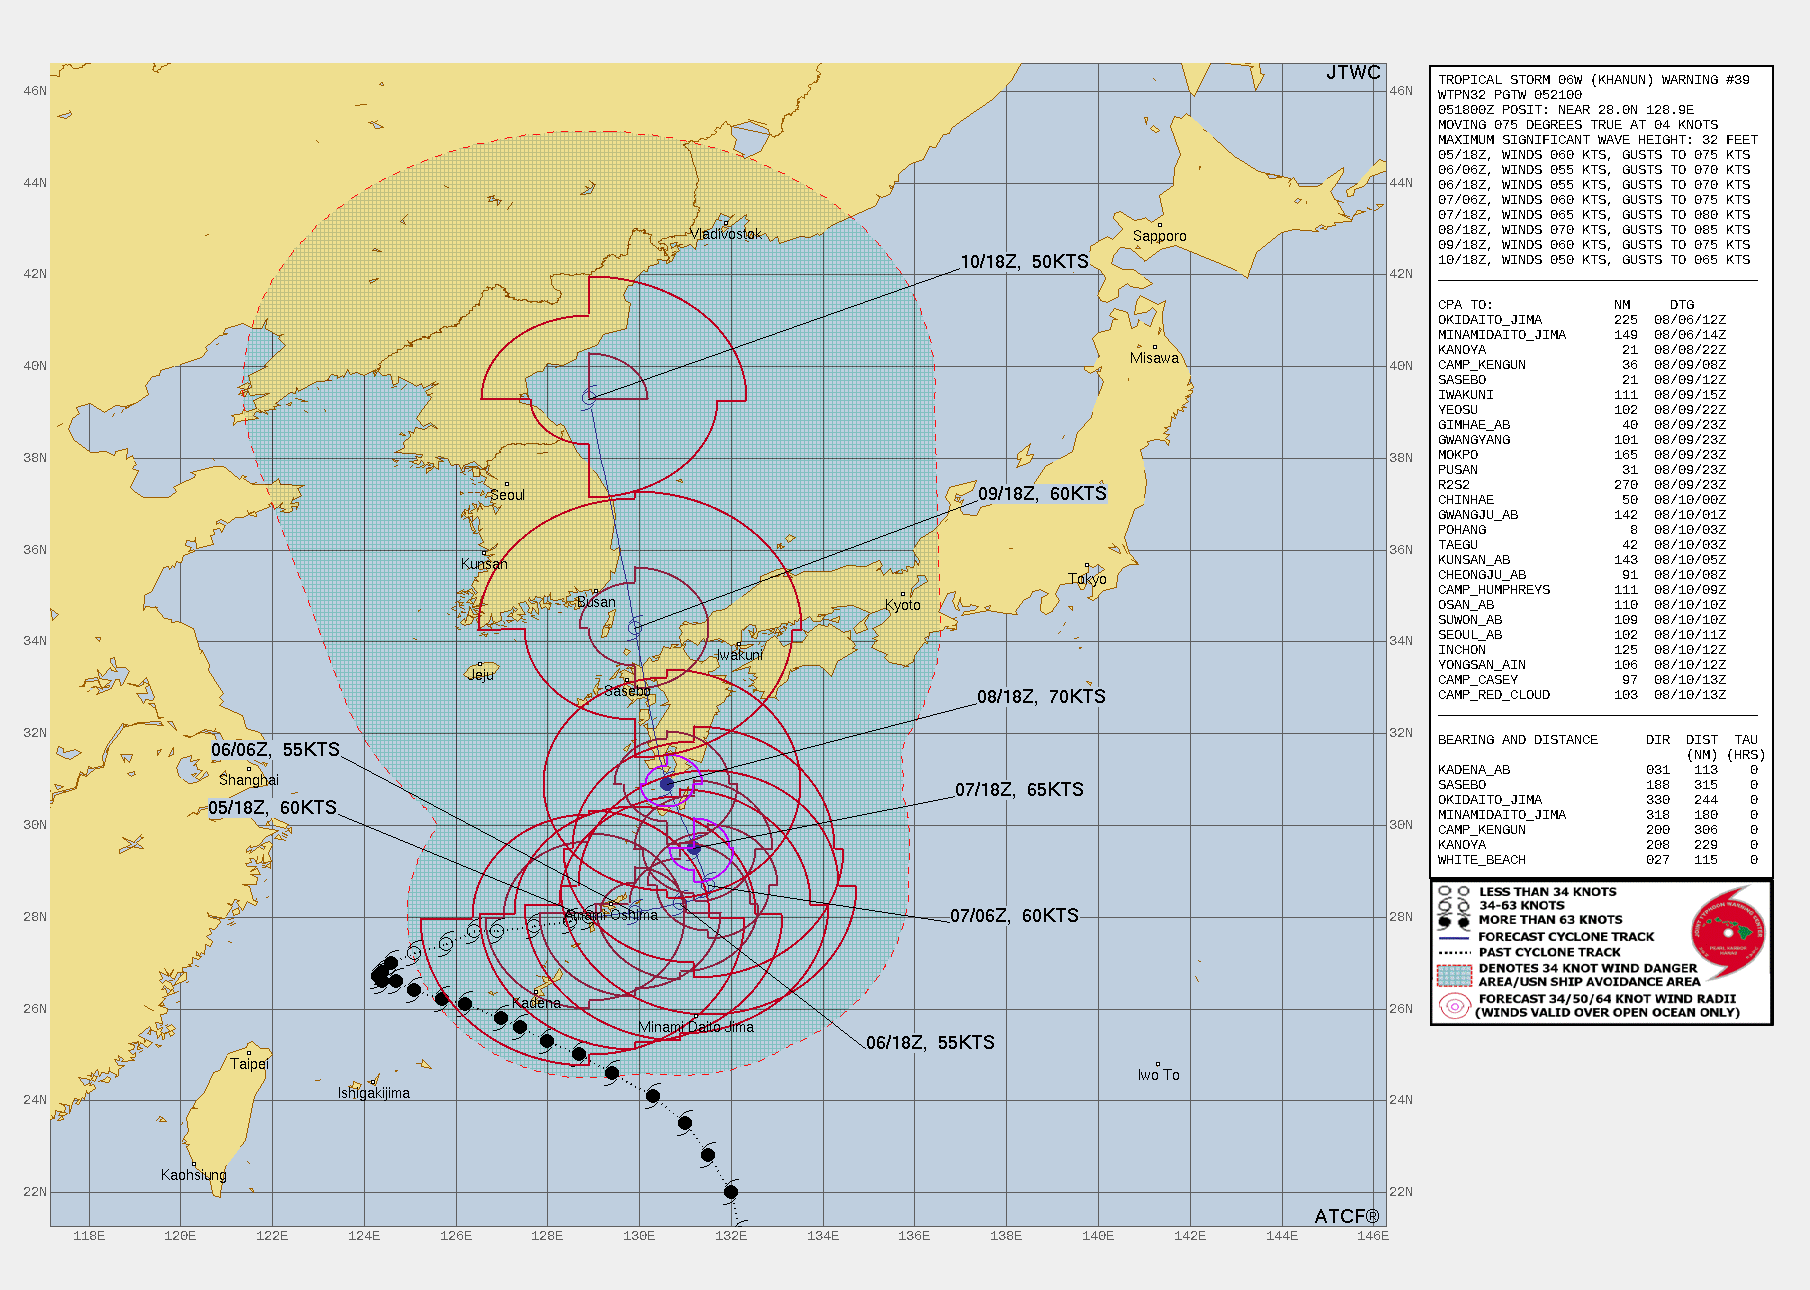 FORECAST REASONING.  SIGNIFICANT FORECAST CHANGES: THERE ARE NO SIGNIFICANT CHANGES TO THE FORECAST FROM THE PREVIOUS WARNING.  FORECAST DISCUSSION: AFTER MAKING A BRIEF PIT STOP AS IT PASSED THE RYUKU ISLANDS, OVER THE NEXT FEW HOURS, TS 06W WILL MOVE INTO THE PHILIPPINE SEA, THOUGH TRACK SPEEDS ARE EXPECTED TO REMAIN RELATIVELY SLOW. ONCE CLEAR OF THE ISLANDS, THE SYSTEM WILL MODESTLY ACCELERATE TOWARDS THE EAST-NORTHEAST UNDER THE STEERING INFLUENCE OF THE NER TO THE SOUTH. BY TAU 36, THE SYSTEM REACHES ANOTHER INFLECTION POINT IN THE STEERING REGIME, SLOWS DOWN TO NEAR QUASI-STATIONARY SPEEDS AND BEGINS TO TURN NORTHWARD. BY TAU 48, THE STRONG SUBTROPICAL RIDGE (STR) CENTERED FAR OUT IN THE NORTHERN PACIFIC TAKES OVER THE DOMINATE STEERING ROLE AND EJECTS TS 06W ON A  NORTH-NORTHWESTWARD TRACK WHICH TRACKS VERY CLOSE TO THE SOUTHERN TIP OF KYUSHU BY TAU 72. THE STR IS FORECAST TO BUILD AND PUSH WESTWARD AFTER TAU 72, WHICH WILL DRIVE TS 06W ONTO A GENERALLY NORTHWARD TRACK AFTER TAU 72, CROSSING VERY CLOSE TO SASEBO BEFORE EMERGING INTO THE TSUSHIMA STRAIT BY TAU 96, THEN TRACKING UP THE EAST COAST OF THE KOREAN PENINSULA THROUGH TAU 120. WHILE THE SYSTEM HAS MOVED OUT OF THE REGION OF MOST INTENSE UPWELLING, THE CONTINUED SLOW TRACK SPEEDS MEAN THAT UPWELLING IS STILL AN ISSUE. COMBINED WITH THE DRY MID-LEVEL AIR THAT CURRENTLY LIES OVER TOP OF THE SYSTEM, AND THE LACK OF MUCH OF AN OUTFLOW CHANNEL, THE SYSTEM IS EXPECTED TO WEAKEN SLIGHTLY THROUGH THE NEXT 12 TO 24 HOURS. BY TAU 24, IT WILL HAVE MOVED FAR ENOUGH INTO THE PHILIPPINE SEA TO ACCESS WARMER, HIGHER OHC WATERS, OUTFLOW BEGINS TO IMPROVE AND THE DRY AIR IS EXPECTED TO MOISTEN UP A BIT, WHICH WILL ALLOW THE SYSTEM TO EMBARK ON A SLOW INTENSIFICATION TREND, THE PACE OF WHICH WILL BE LIMITED BY THE EXPANSIVE DIAMETER OF THE CIRCULATION. BY TAU 48, THE CIRCULATION IS FORECAST TO DECREASE IN SIZE, SSTS WILL BE AT THEIR WARMEST (29C) AND THE SYSTEM BEGINS TO TAP INTO A POLEWARD OUTFLOW CHANNEL AHEAD OF AN APPROACHING UPPER-LEVEL TROUGH, TRIGGERING A BURST OF INTENSIFICATION UP TO 70 KNOTS AS THE SYSTEM APPROACHES LANDFALL. PASSAGE OVER KYUSHU WILL LEAD TO A GENERALIZED WEAKENING DUE TO TERRAIN INTERACTION, WHICH IS EXPECTED TO CONTINUE AS THE SYSTEM MOVES NORTH JUST EAST OF THE KOREAN PENINSULA. BY TAU 120 THE SYSTEM BEGINS EXTRATROPICAL TRANSITION (ETT) AS IT INTERACTS WITH A SHARP 500MB TROUGH AND ASSOCIATED BAROCLINIC ZONE.